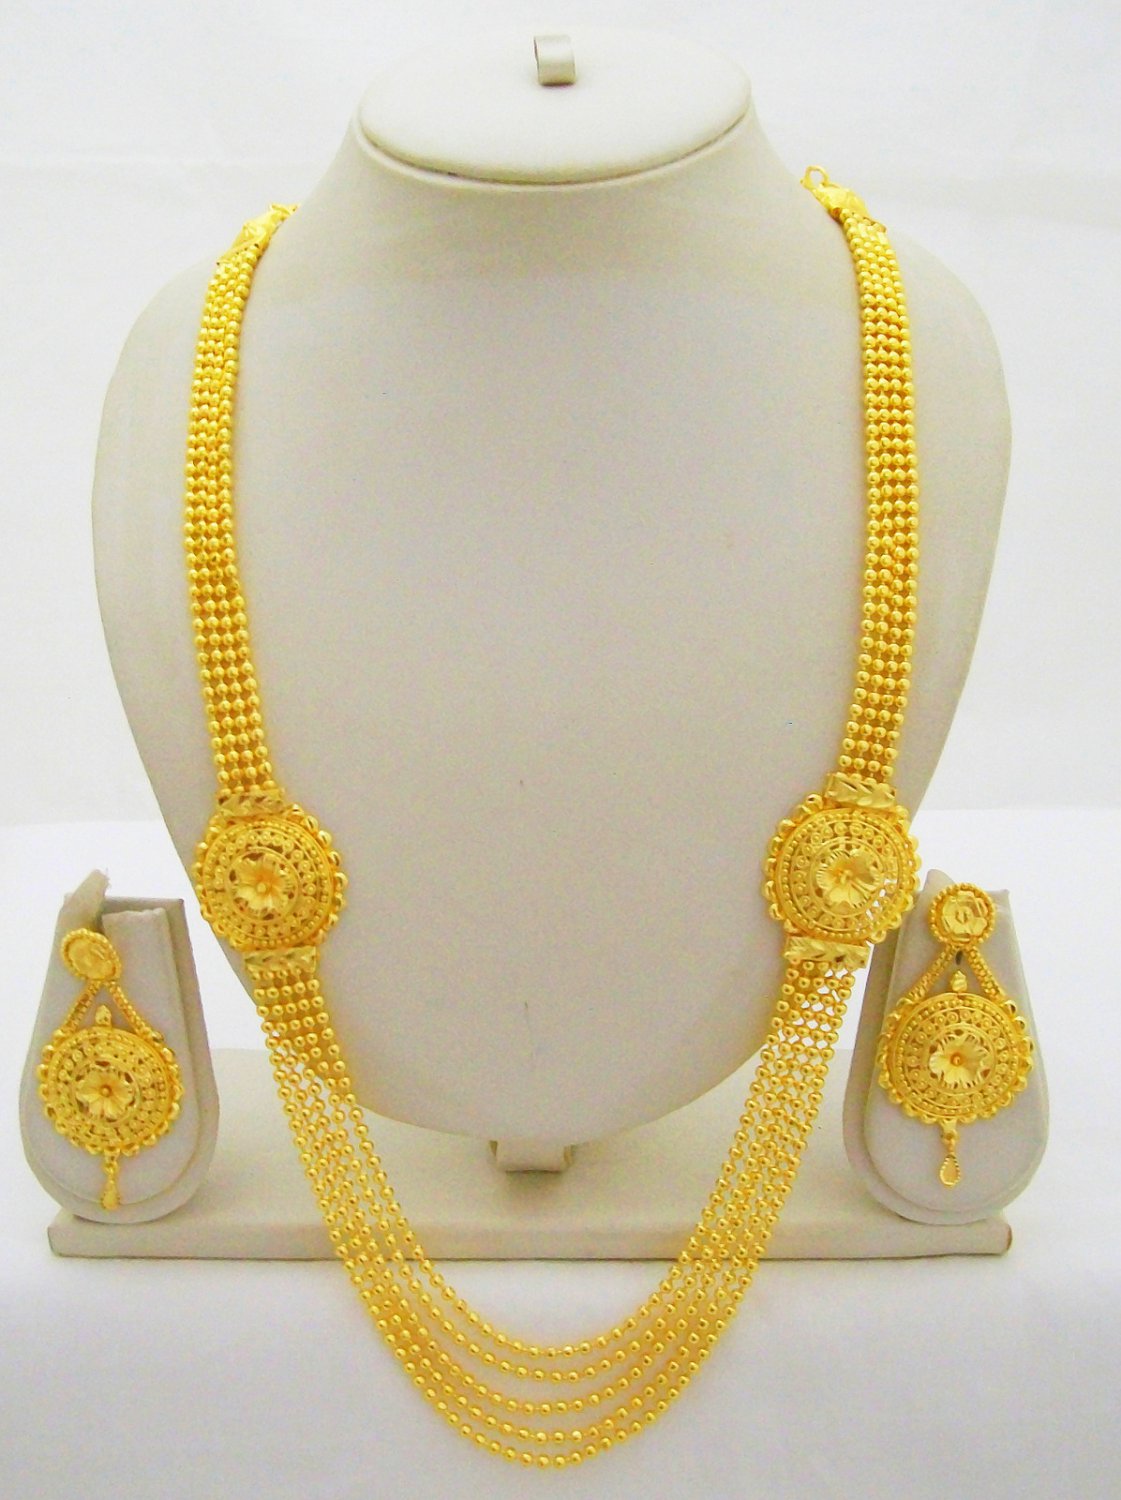 Gold Plated Indian Rani Haar Necklace Beads Chain Long Layered Bridal ...